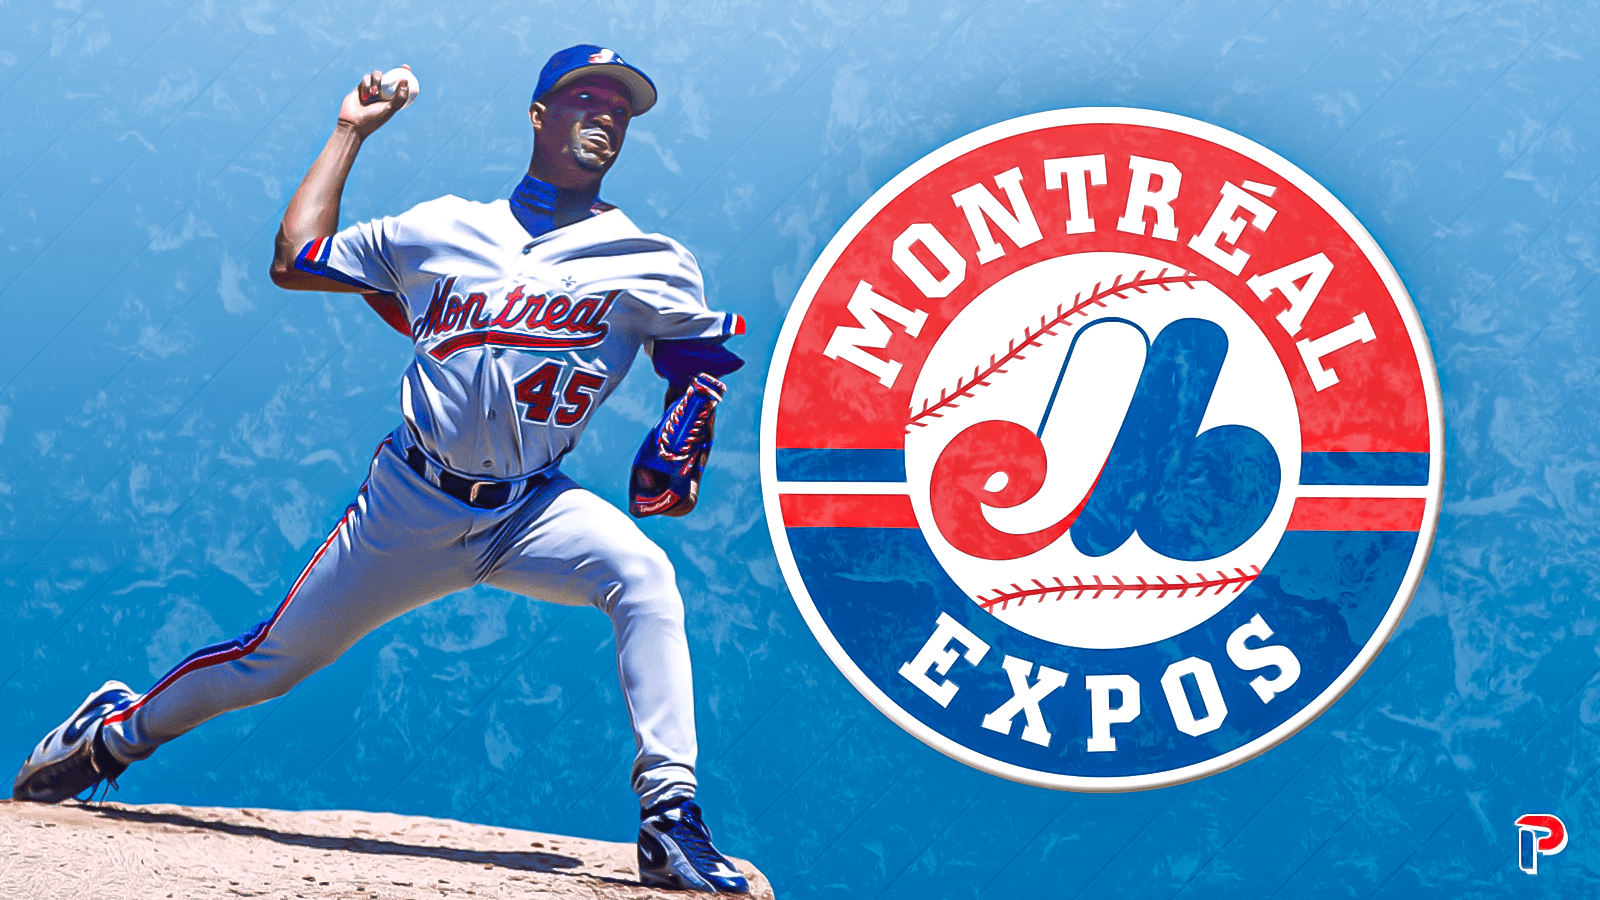 Blue Jays Bullpen: Memories of Pedro Martinez with the Expos